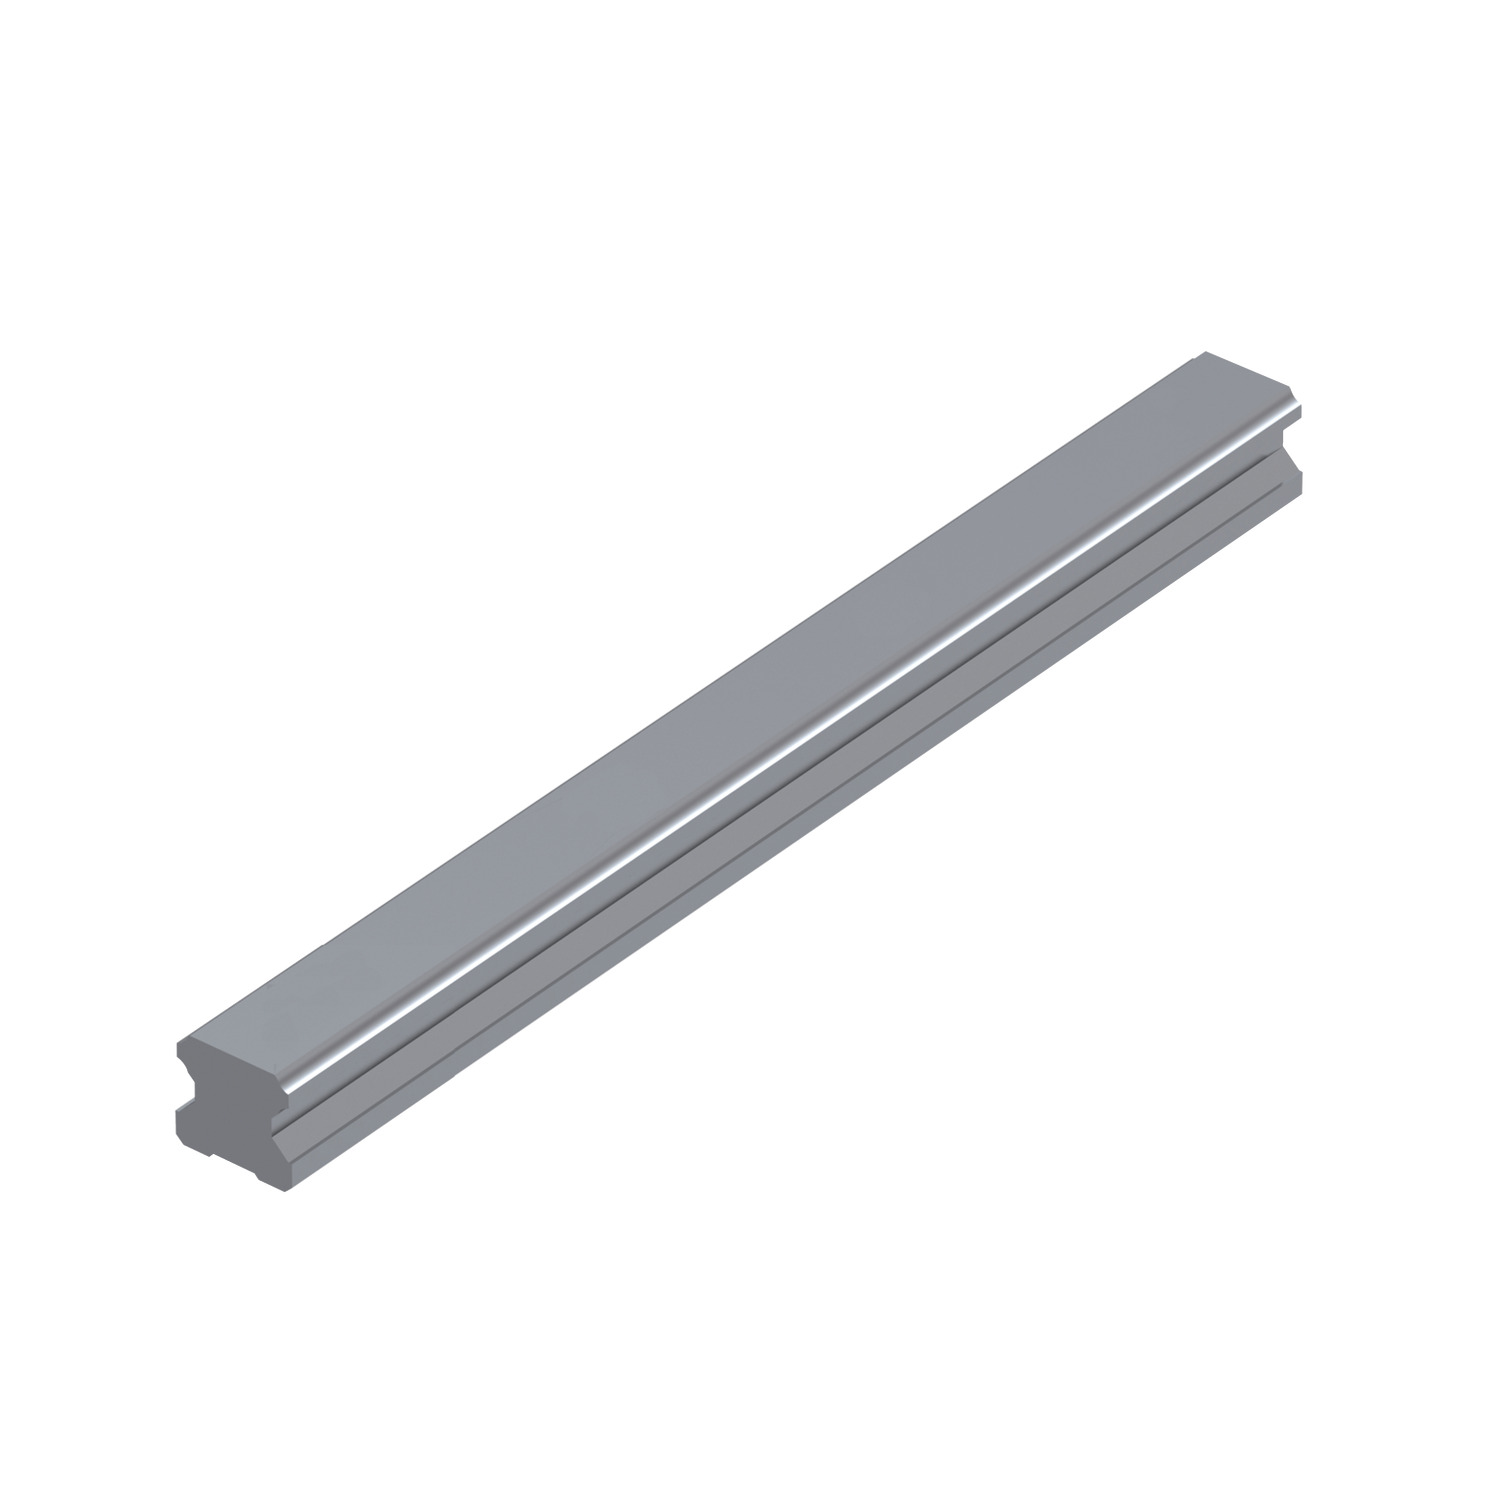 L1016.RF15-2620 Linear guide rail rear fixing 15mm 2620 Hardened and ground steel. EC:20166434 WG:05063055295086